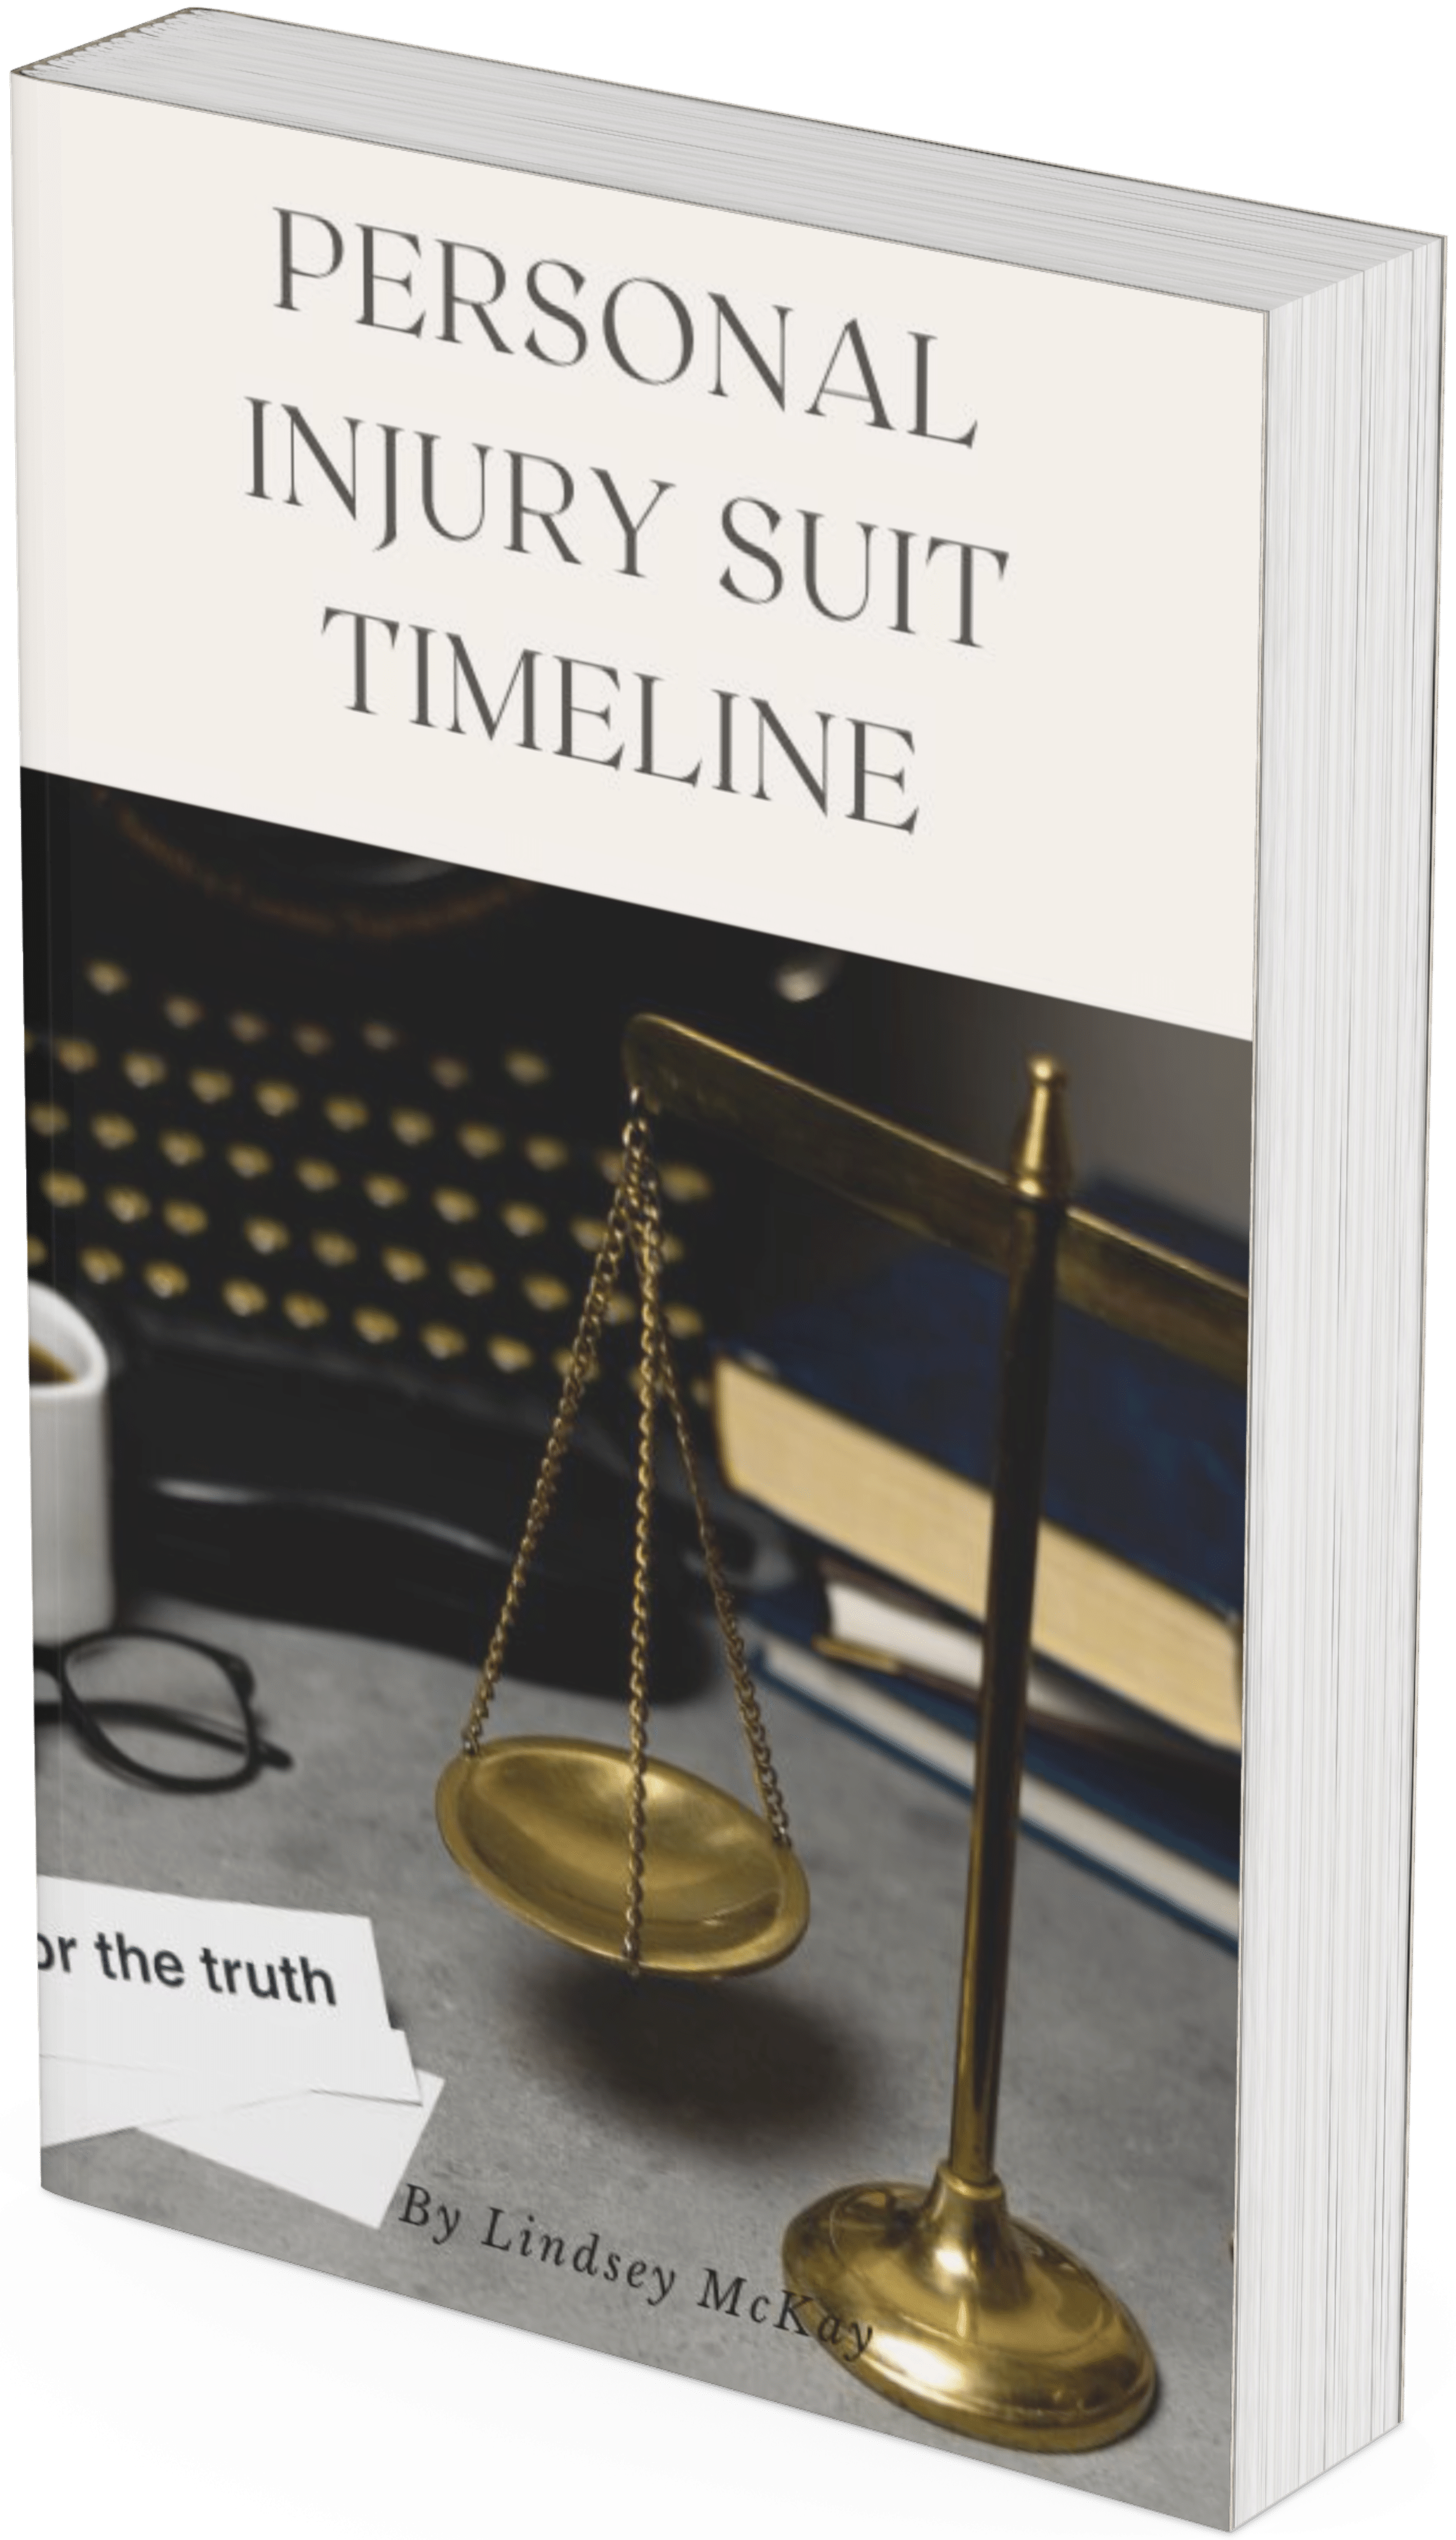 Personal Injury Suit Timeline​